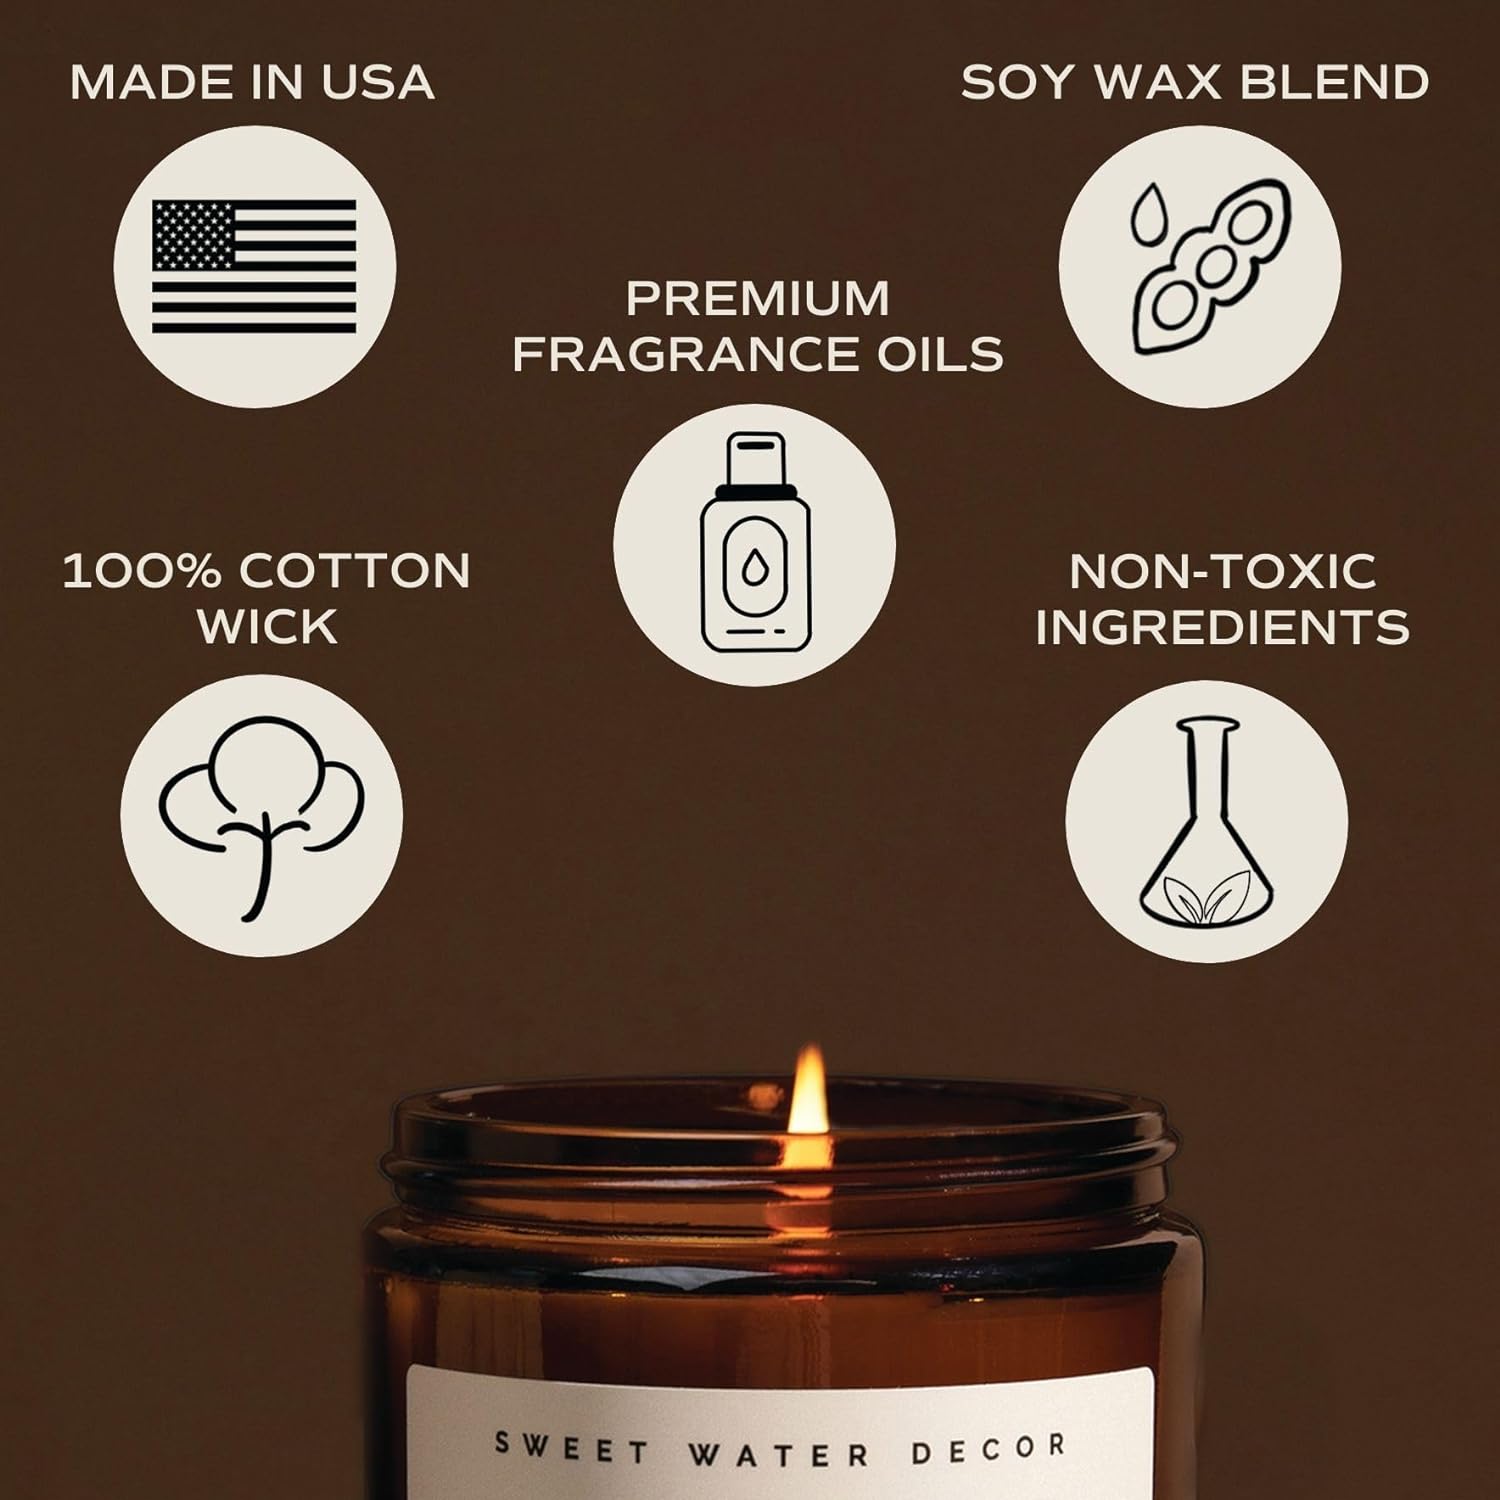 Sweet Water Decor Palo Santo Patchouli Candle | Vanilla, Musk, Sandalwood, Patchouli Scented Soy Candles for Home | Gifts for Women, Men, Housewarming | 9oz Amber Jar, 40 Hour Burn Time